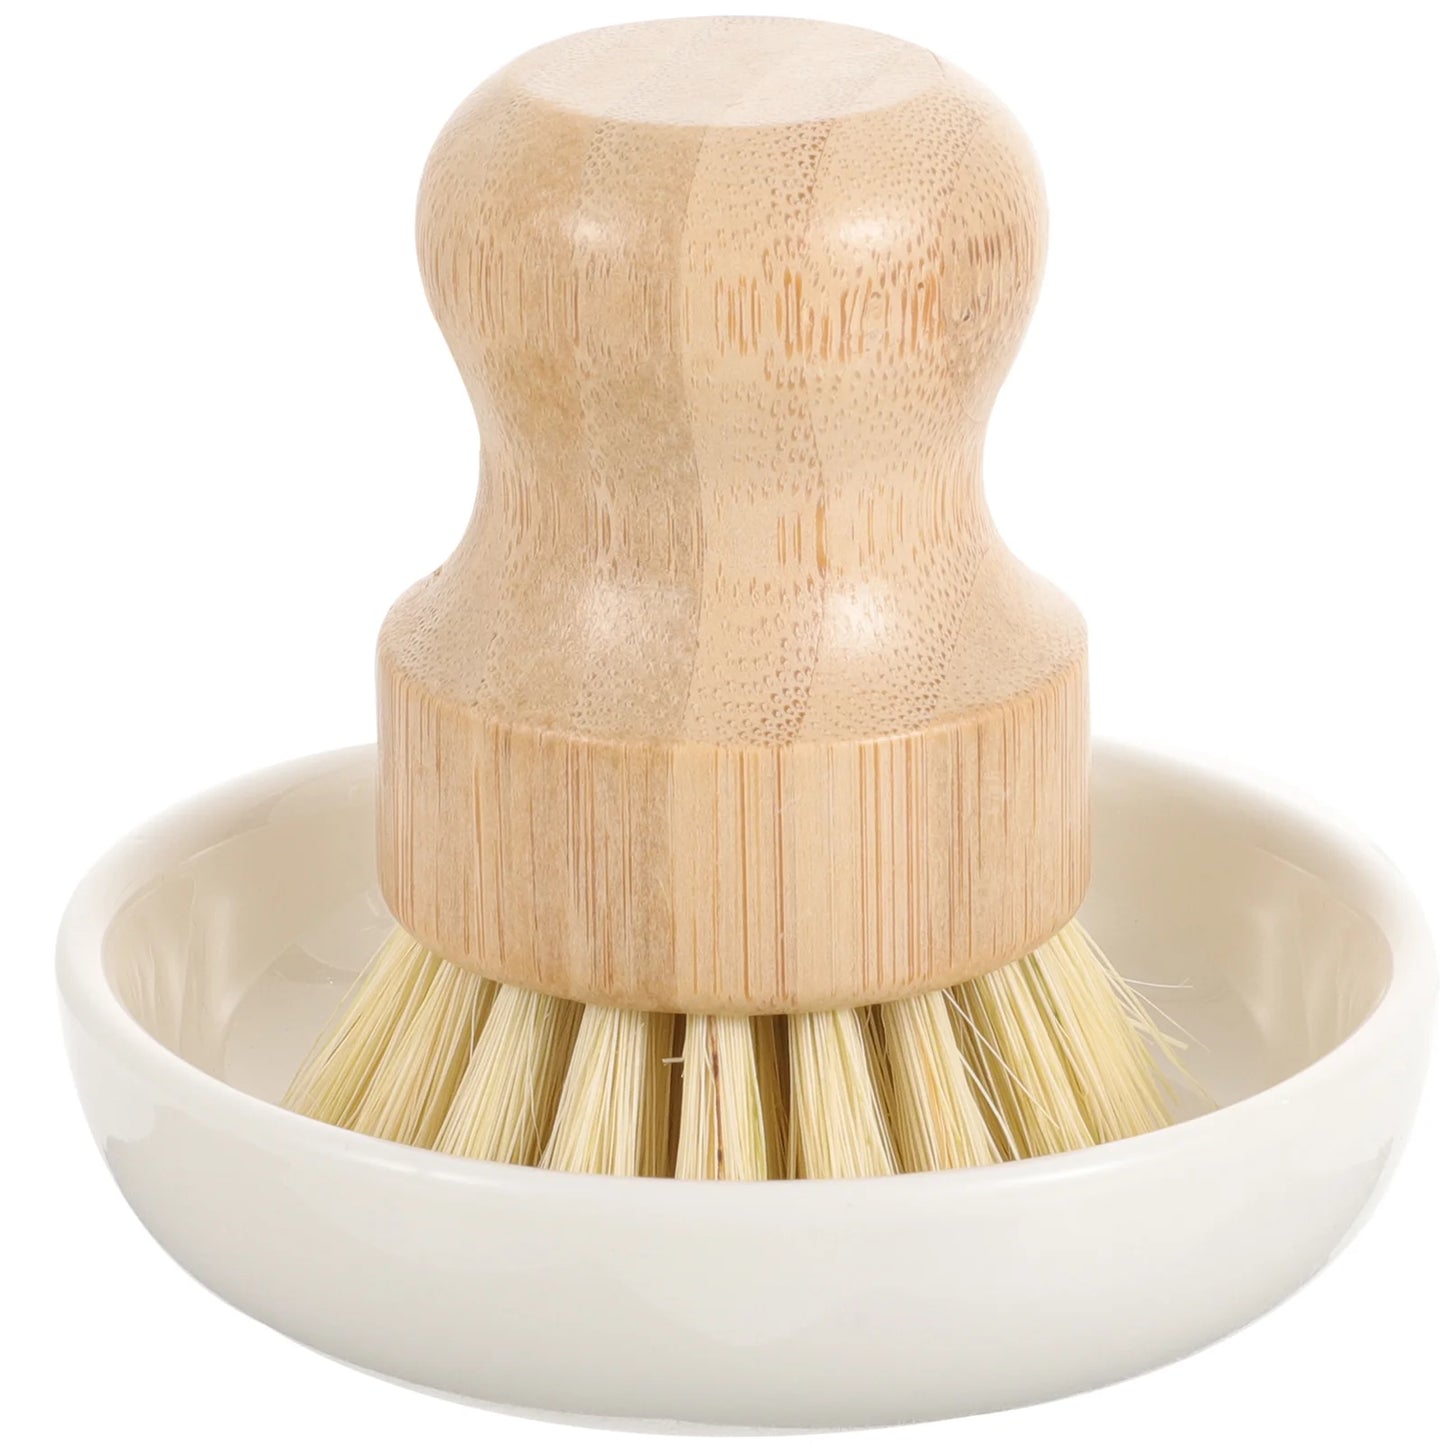 Electric Dish Scrubber Kitchen Cleaning Brush
Wood Handle Palm Wash Pot Dirt Round Wisely